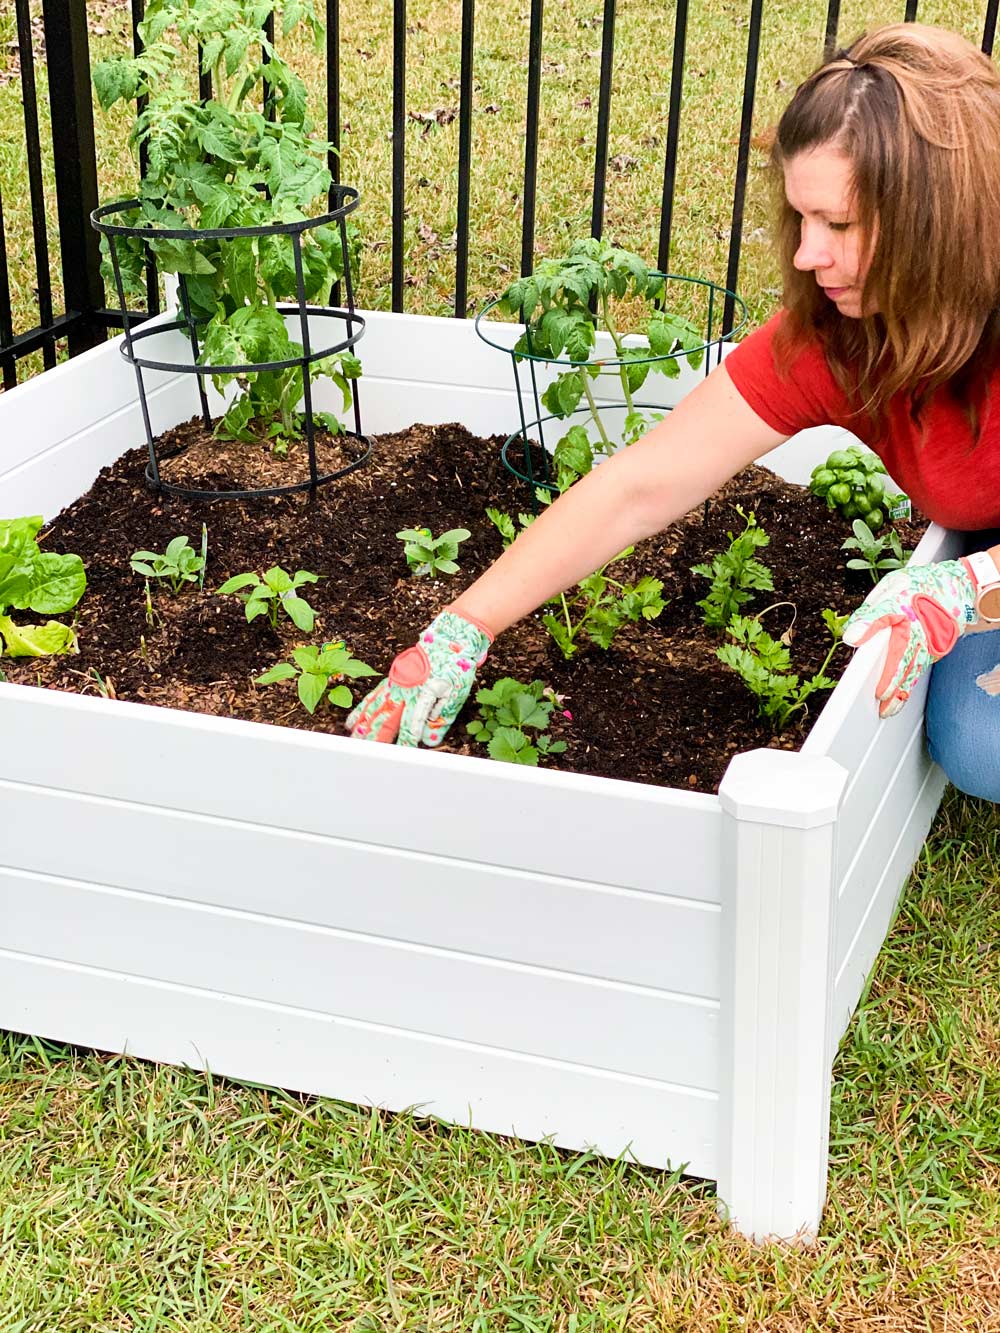 Woman plutting plants into a raised garden bed.